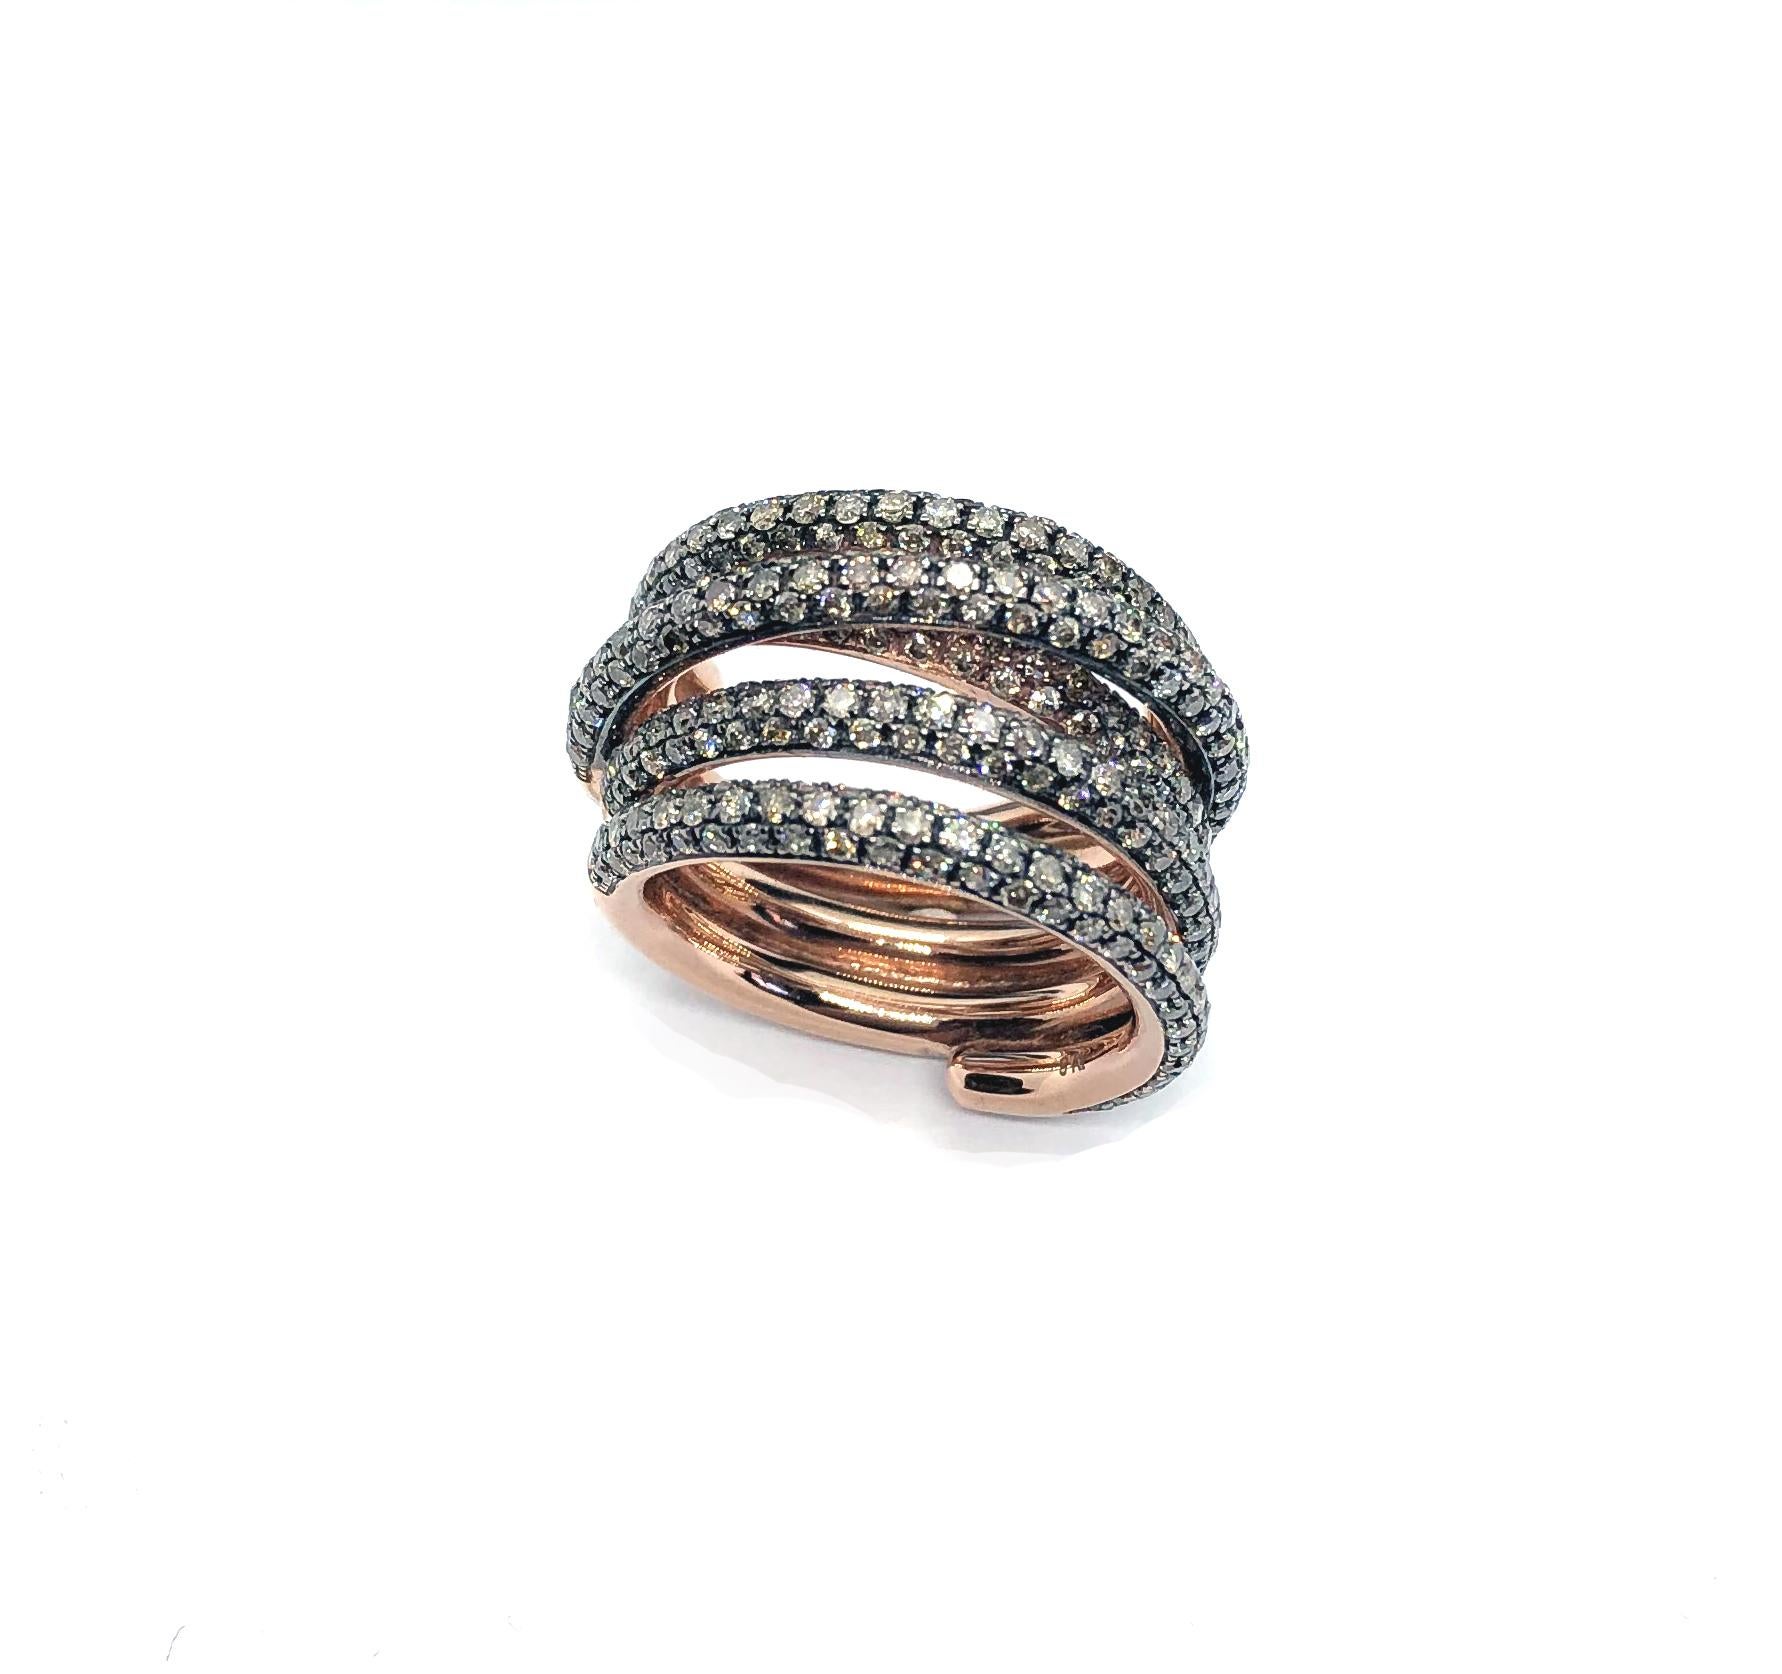 Twist strand Band ring in 9 Kt rose gold gr 16.15 hand crafted in our factory in Italy by ours  skilled artisans, this ring beholds 2.75 ct. round cut Vs fine quality brown diamonds.

Classic, sophisticated, fashion look, everlasting in time